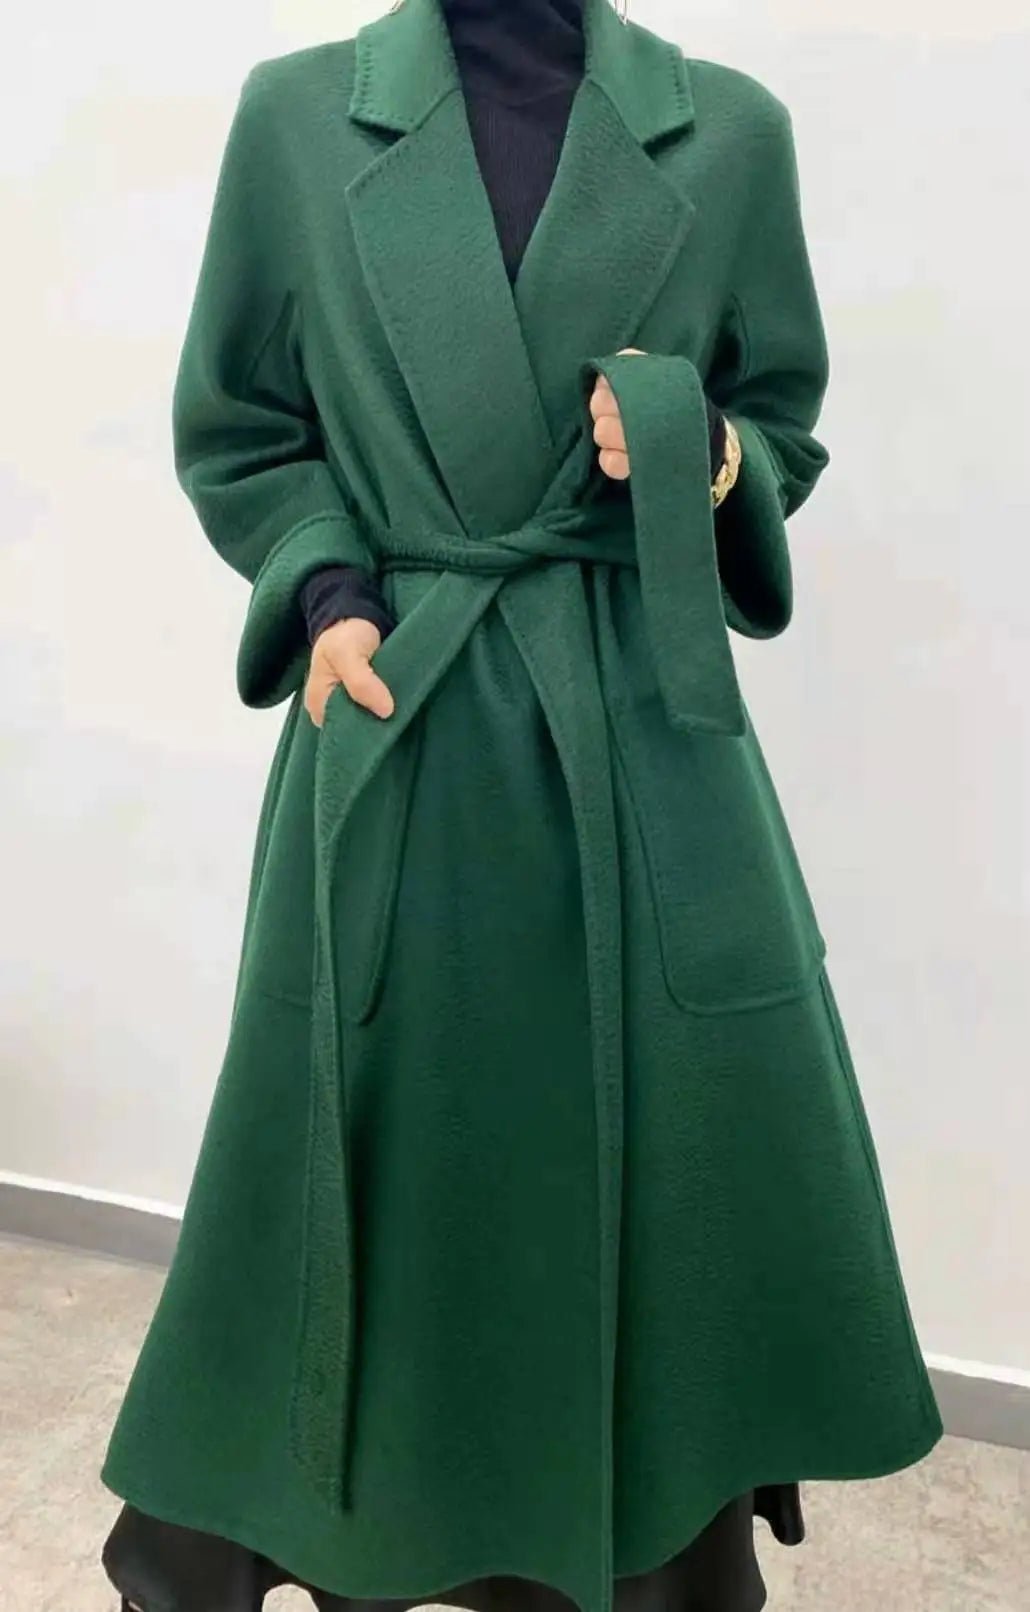 Holltoll High Quality Warm Fashion Cute Trench Autumn Jackets 2020 Women Winter Coats - Guy Christopher